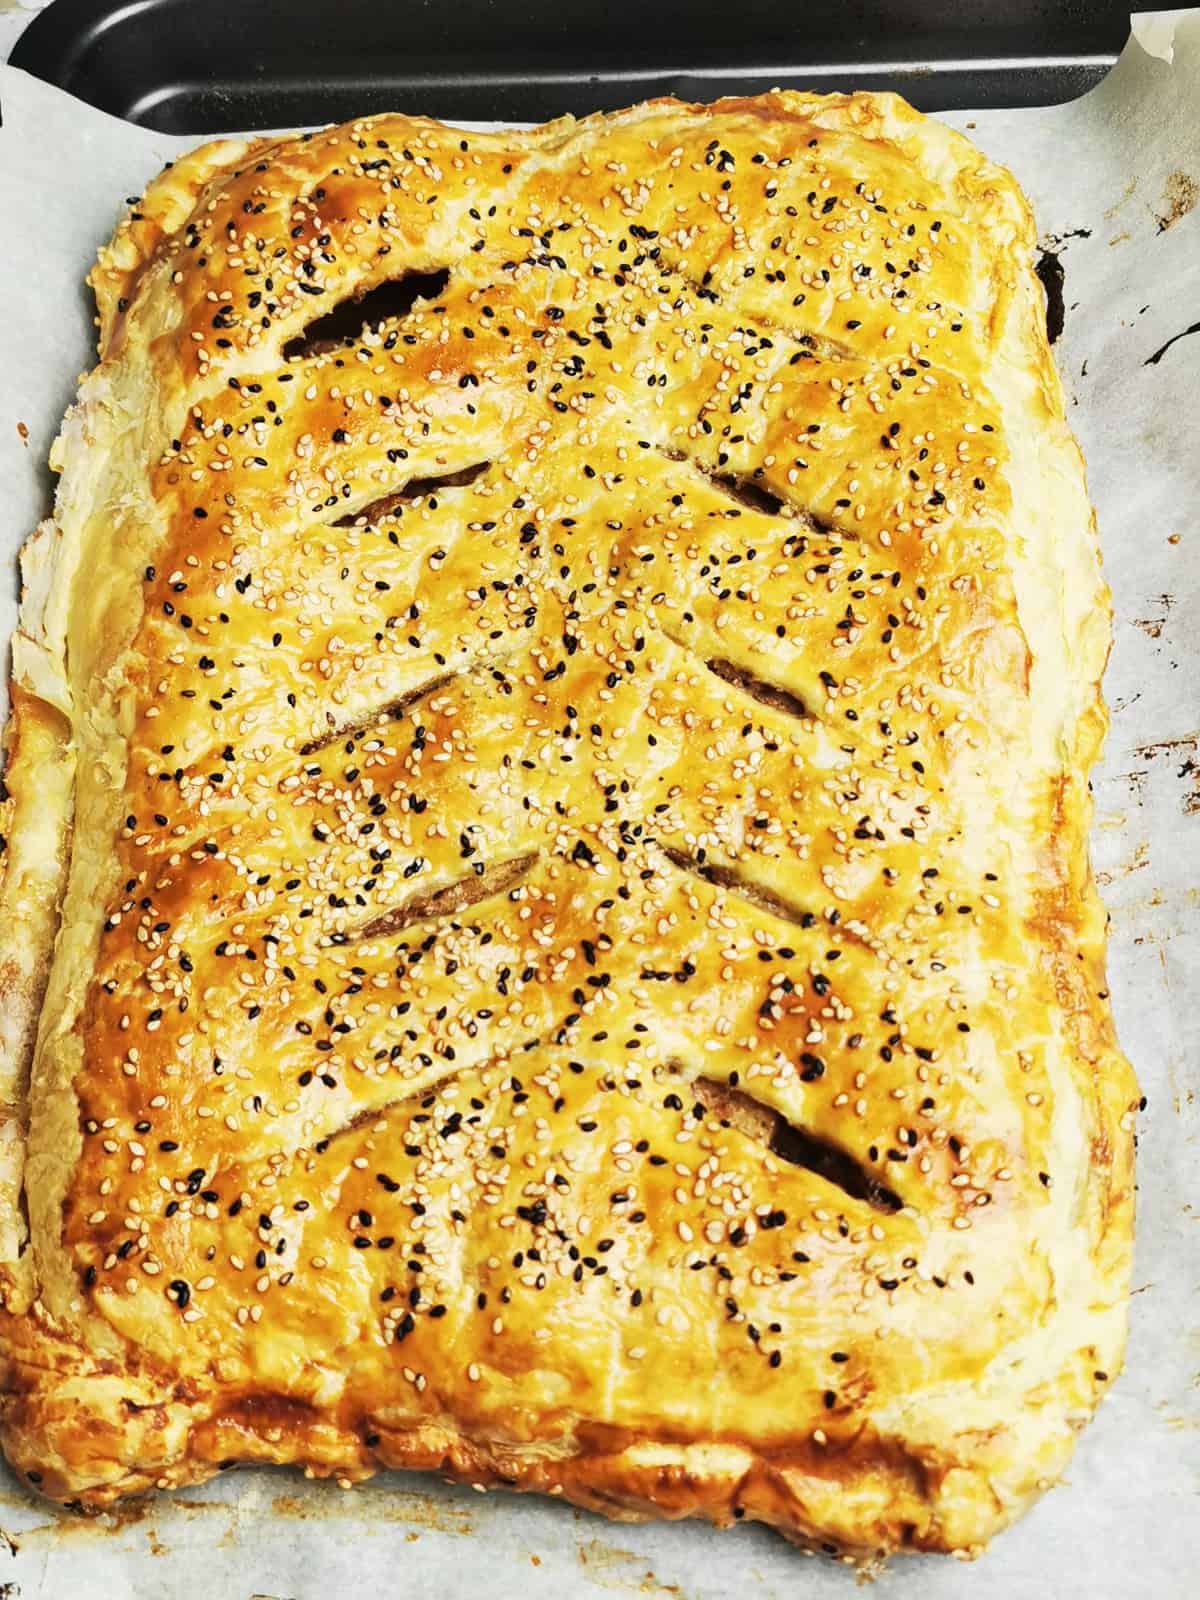 Cottage cheese and apple pie baked in the oven